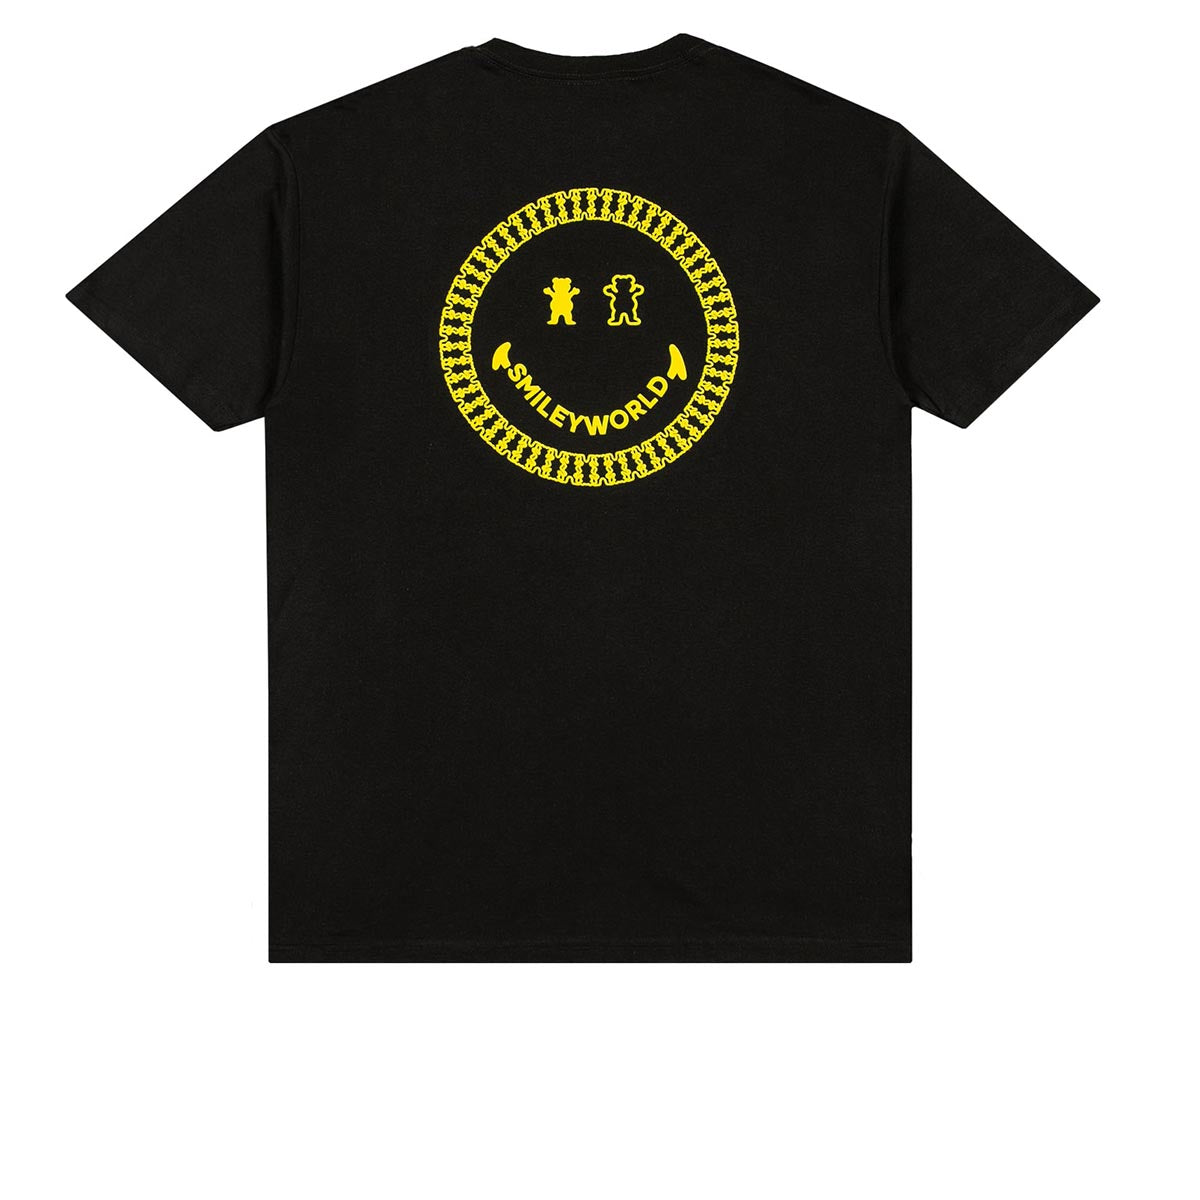 Grizzly x Smiley World School Of Happiness T-Shirt - Black image 2